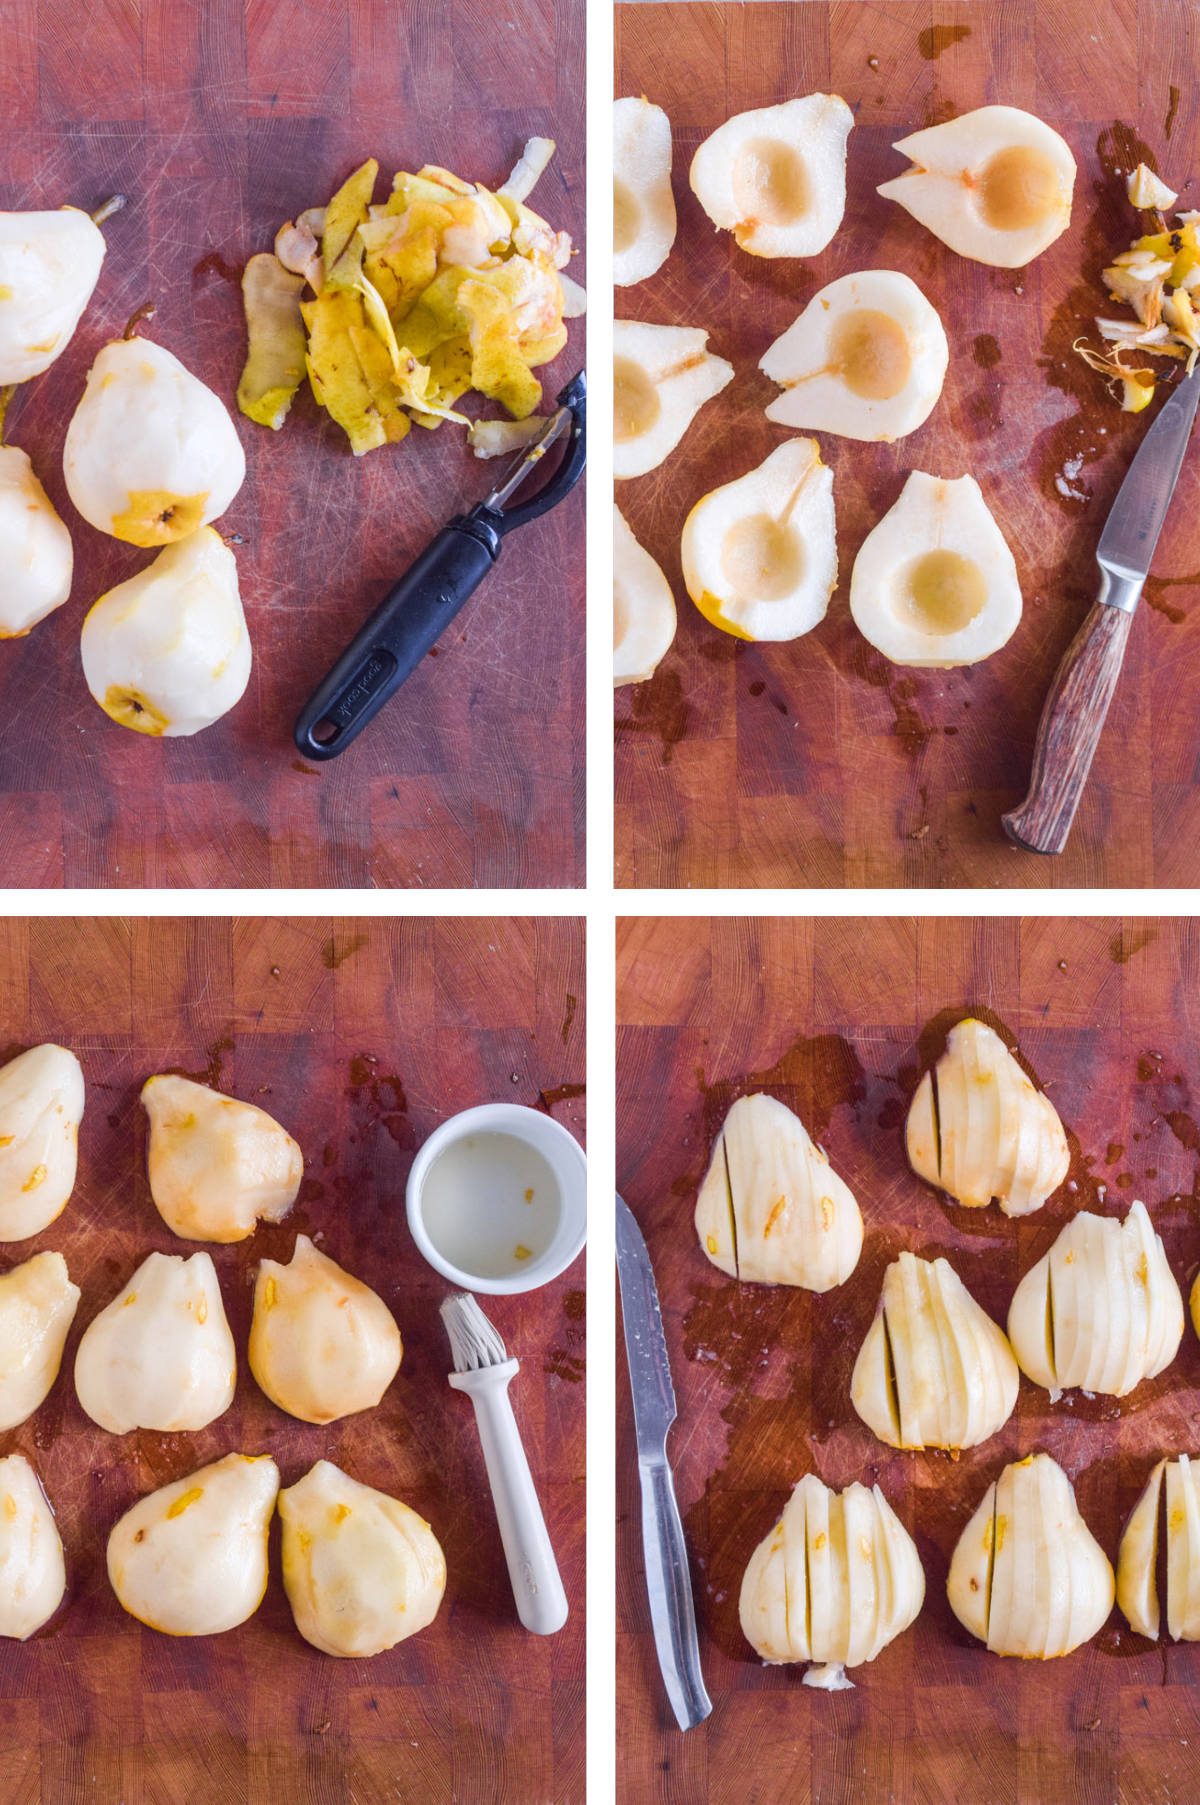 Four overhead images in one: 1. Pears peeled with vegetable peeler. 2. Pears sliced in half. 3. Pears brushed with lemon juice. 4. Pears sliced thin.